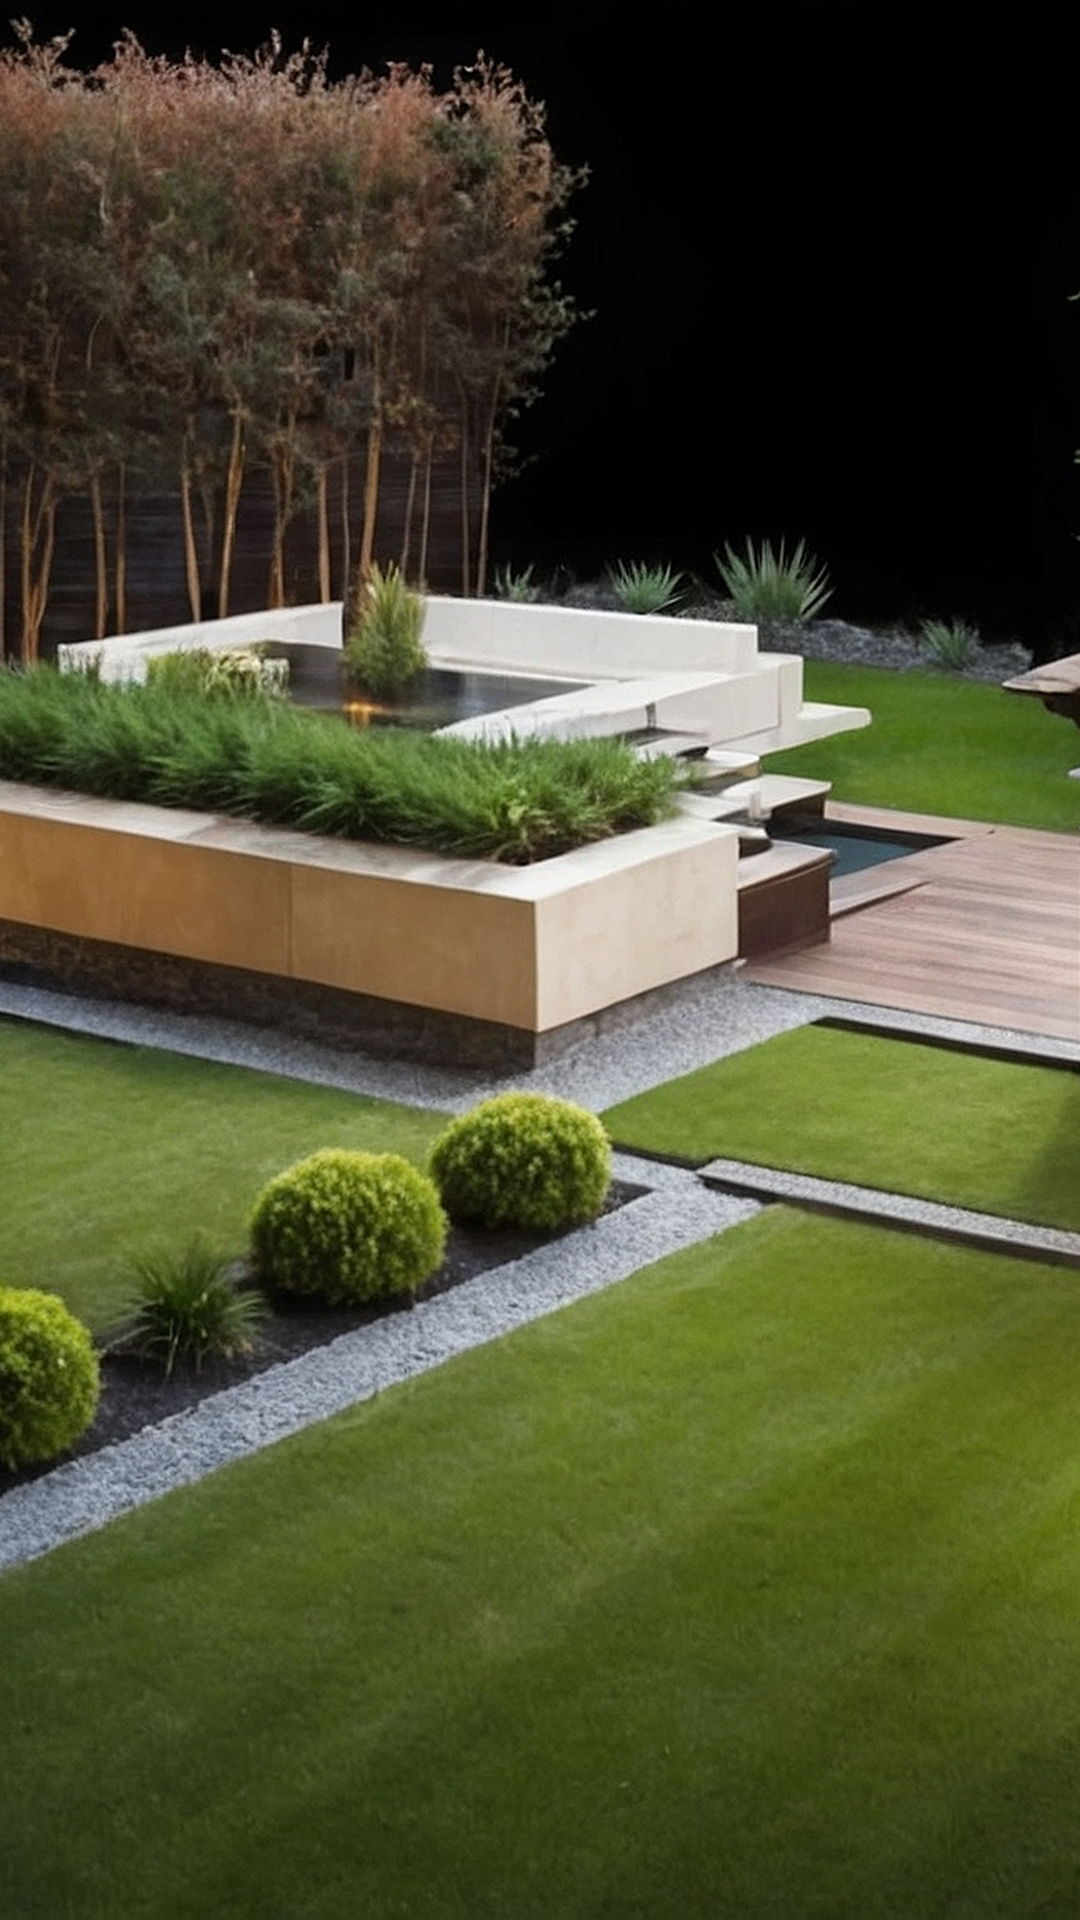 Creating Scenery: Discover Outdoor Landscaping Ideas